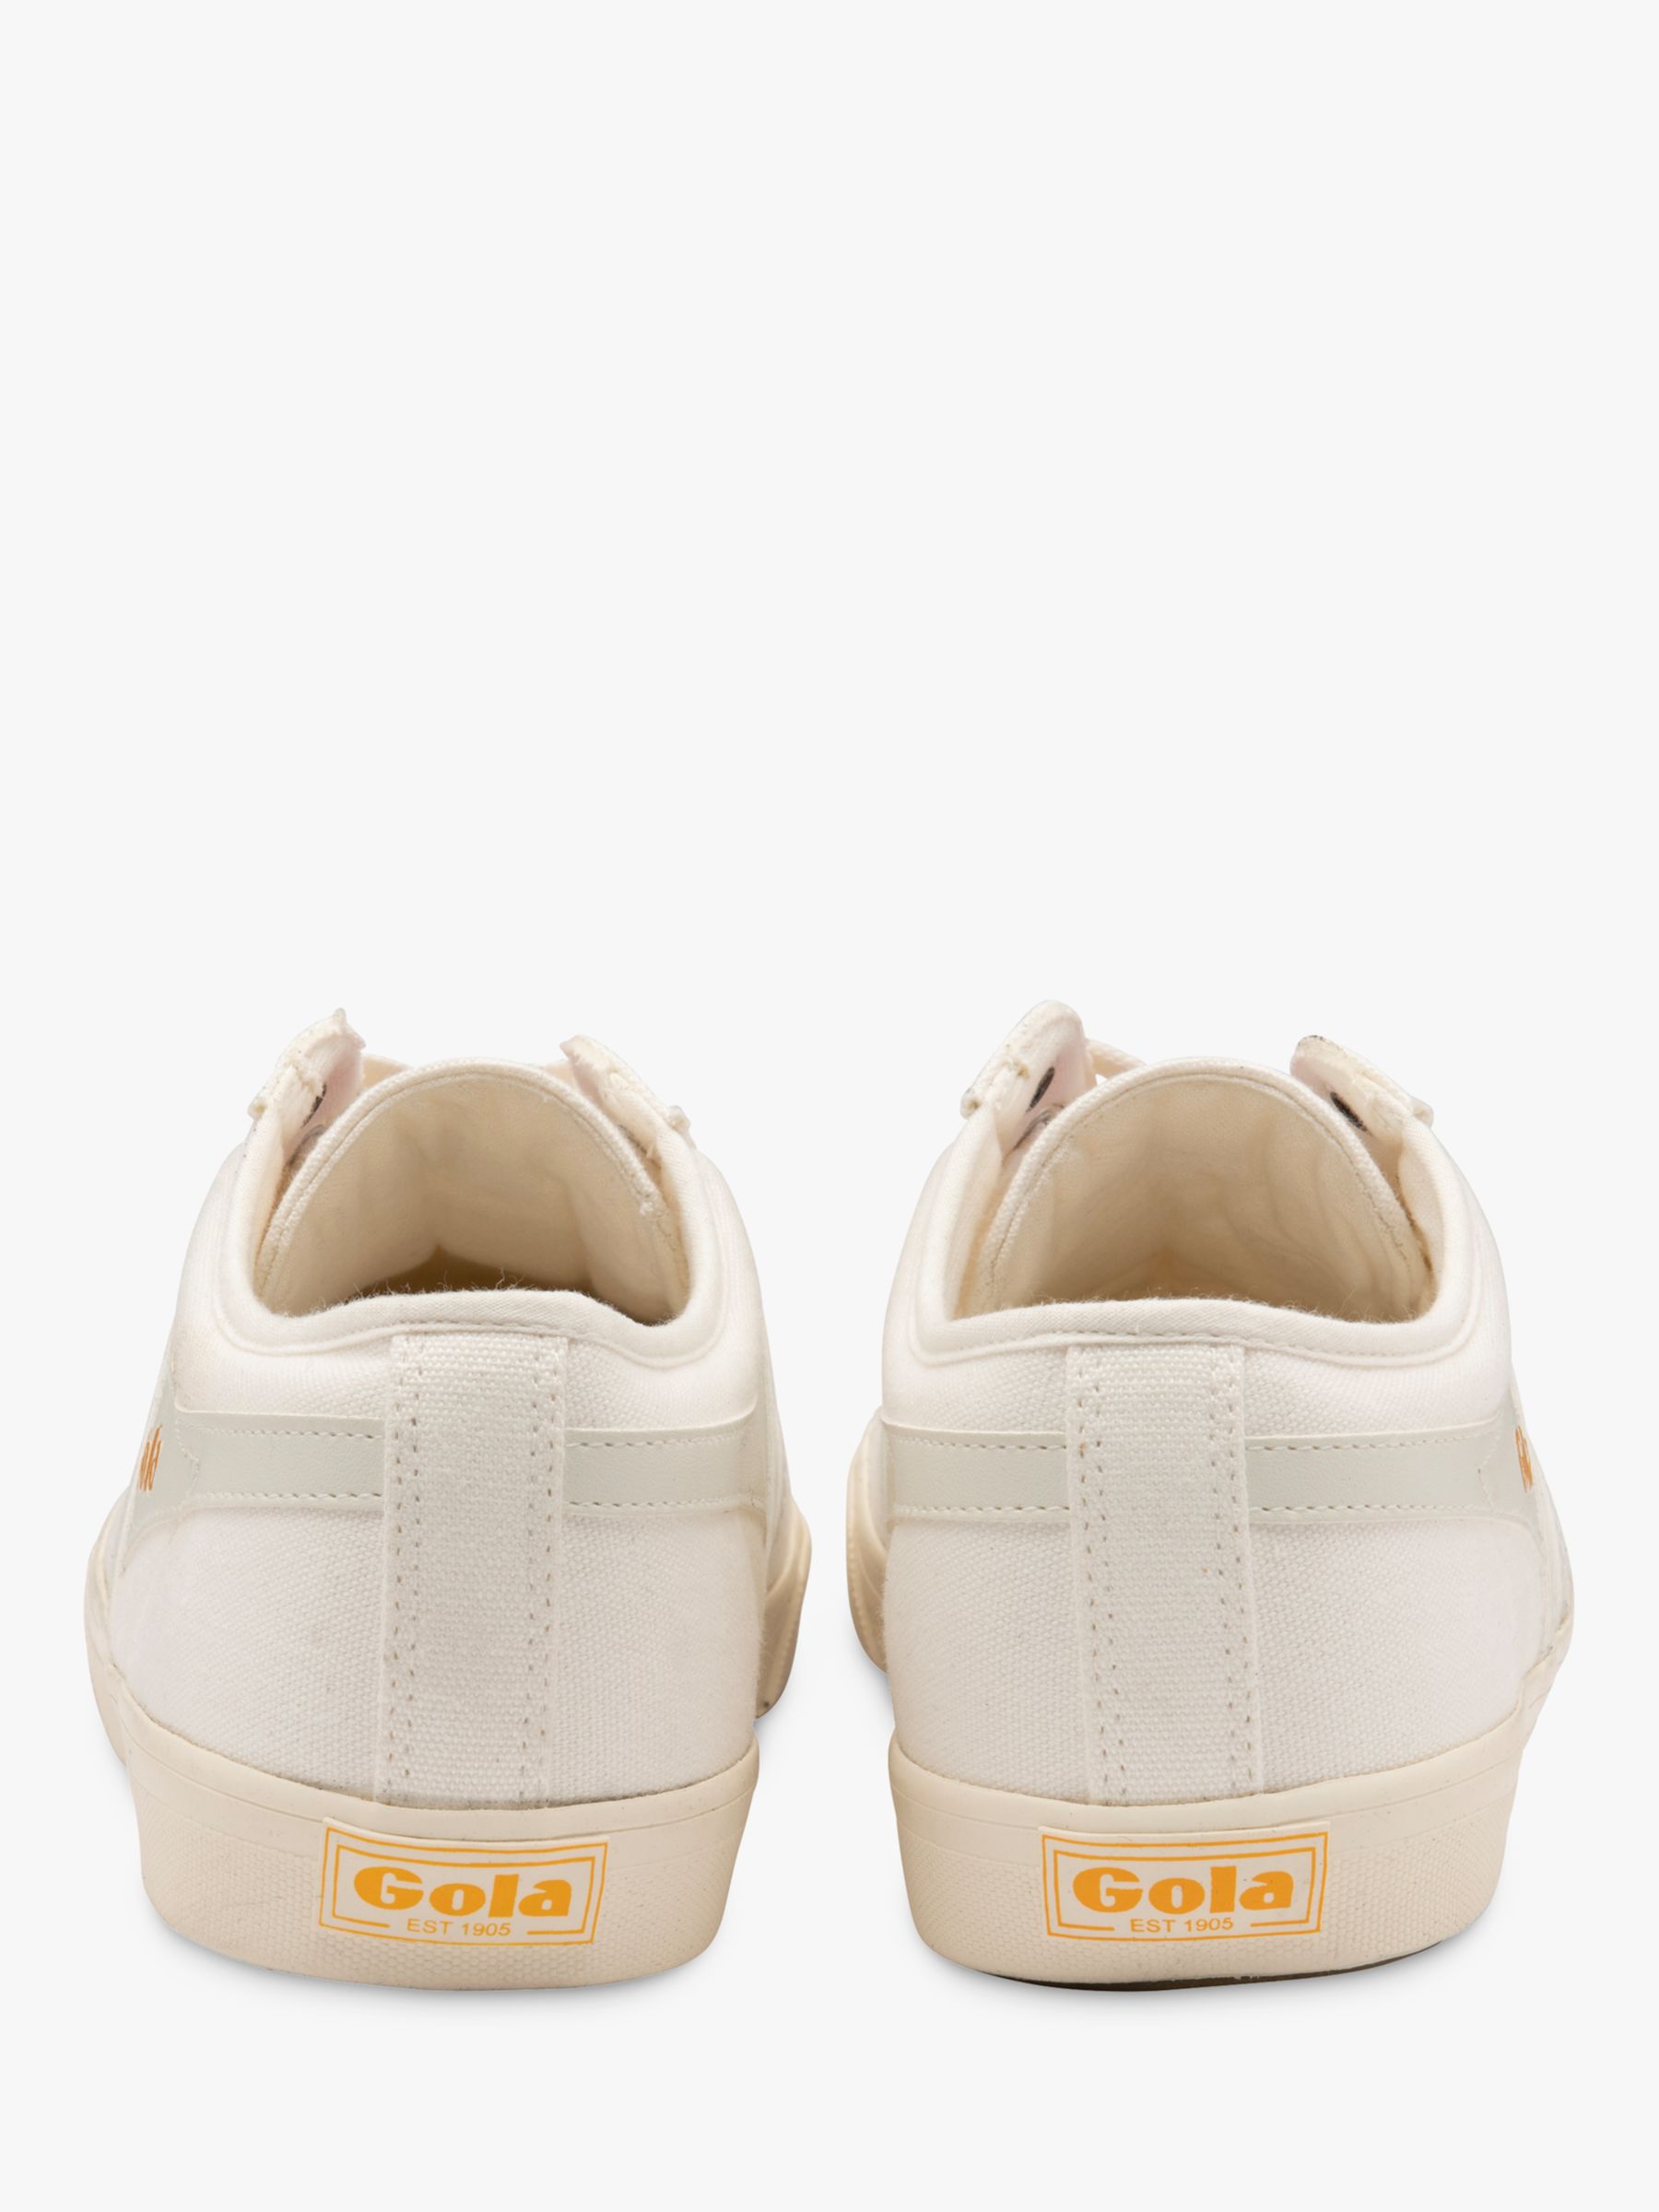 Gola Classics Comet Canvas Lace Up Trainers, Off White at John Lewis ...